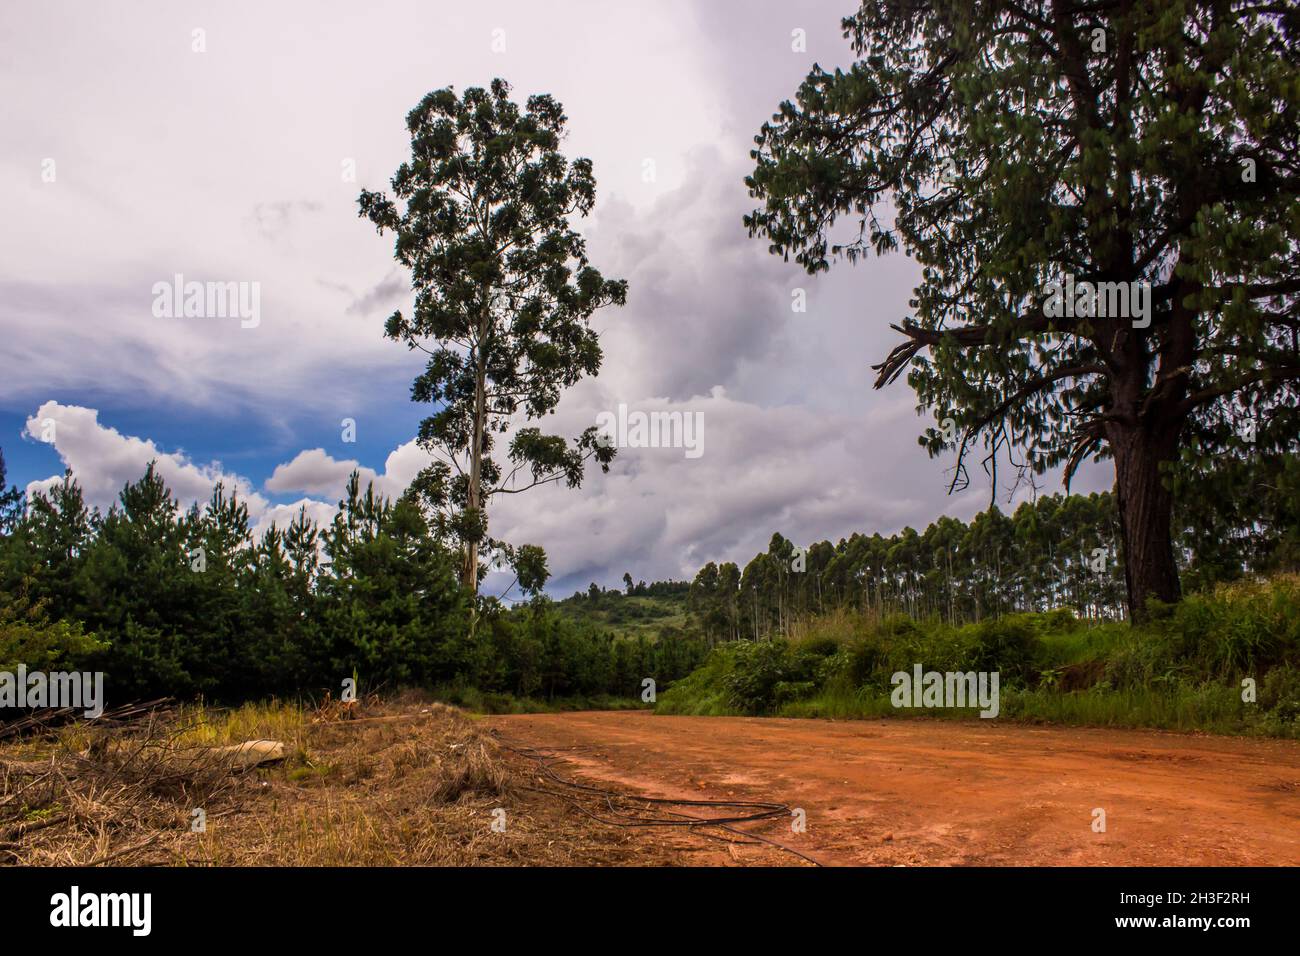 A lone Eucaluptus tree next to a rural dirt road in Magoebaskloof, South Africa, surrounded by small pine trees from plantation Stock Photo